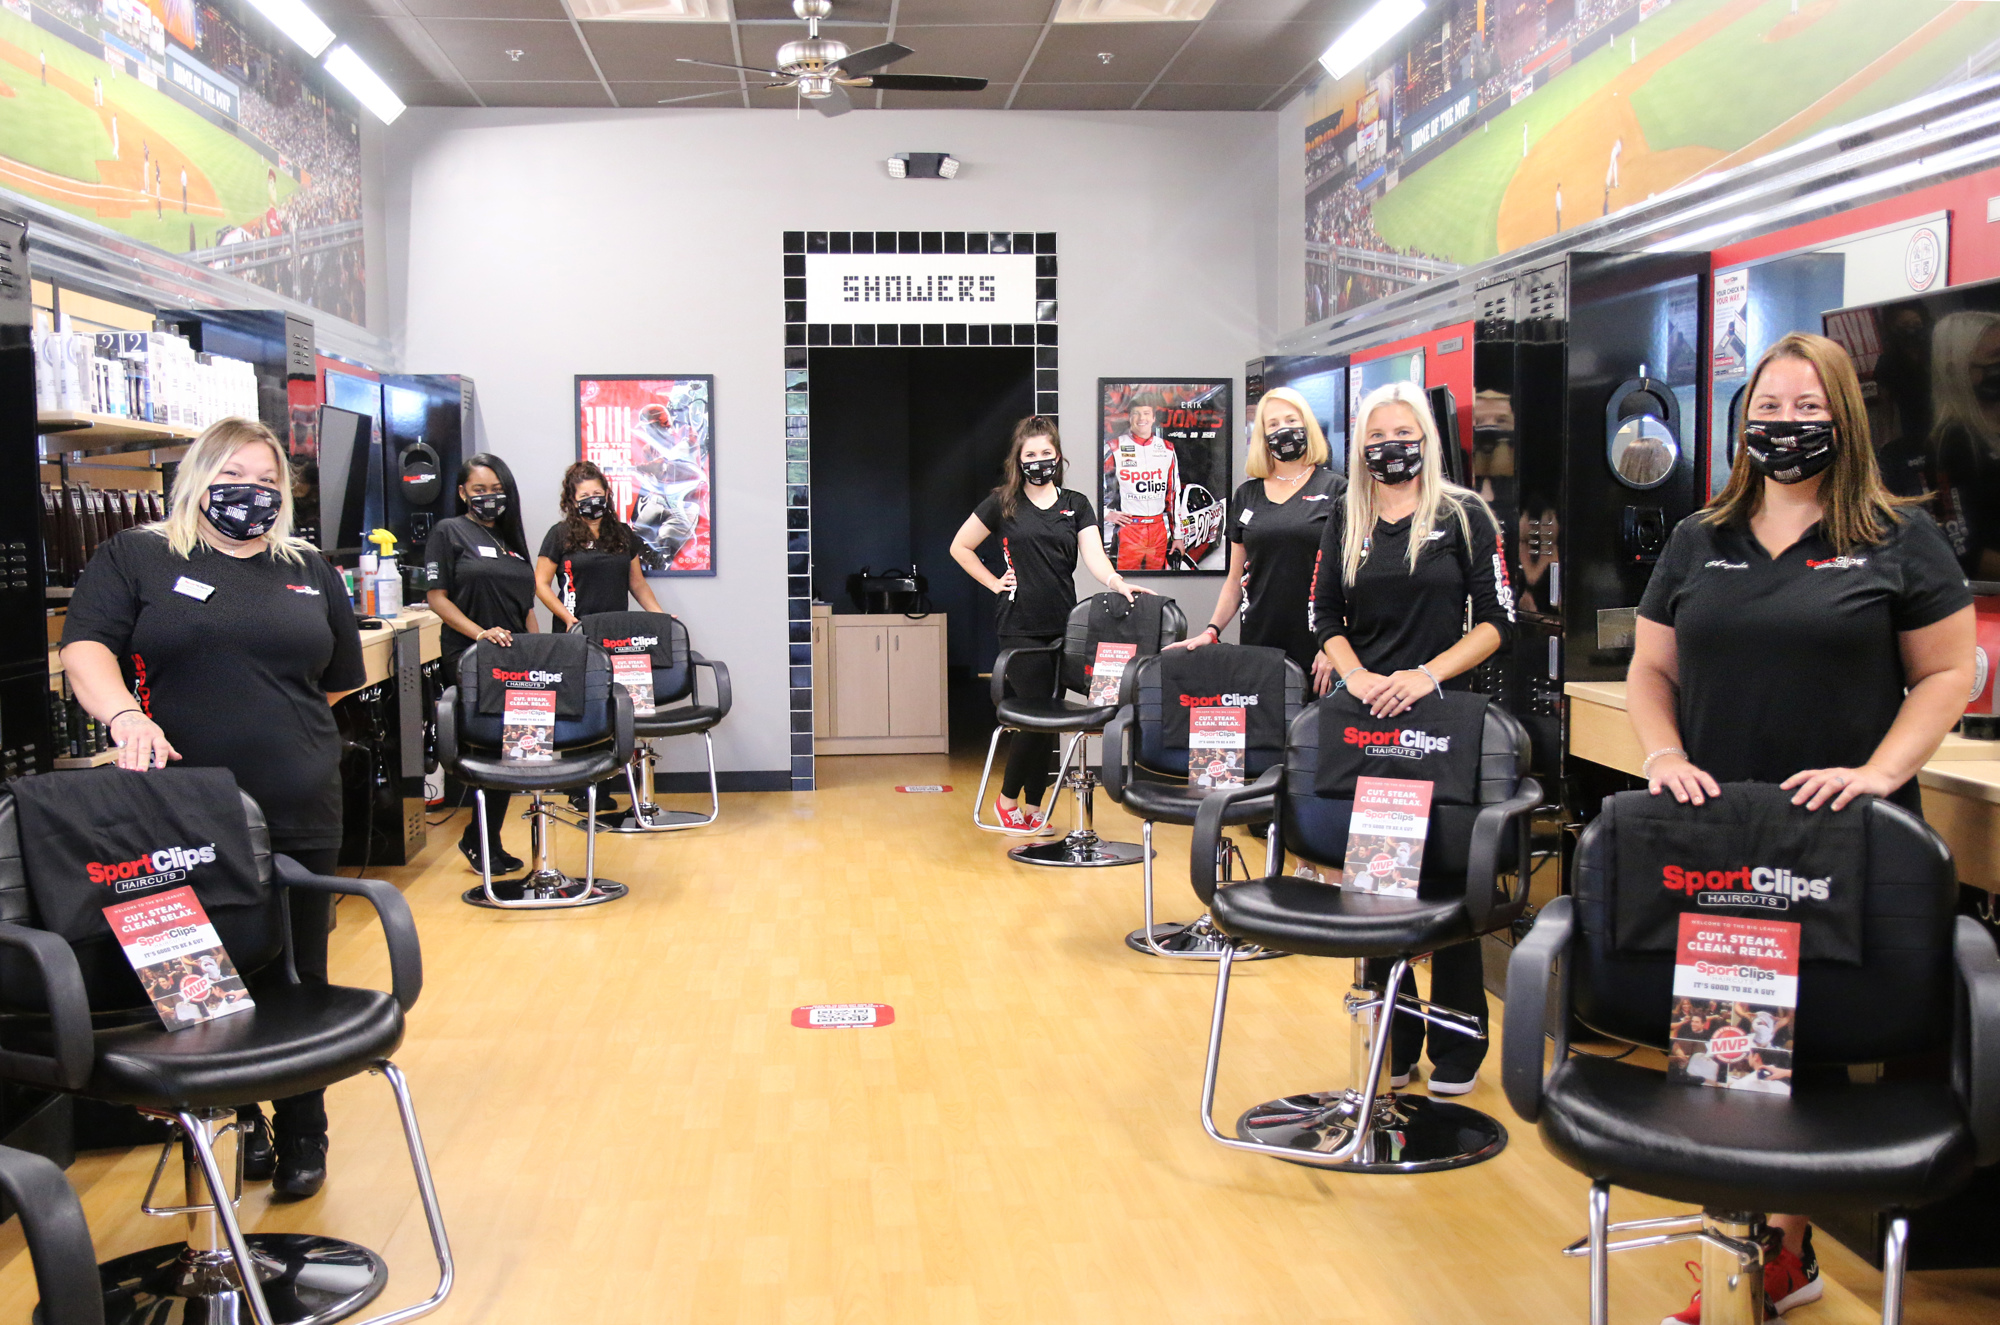 The team at Sport Clips Haircuts is ready to welcome the Ormond Beach community. Photo by Jarleene Almenas